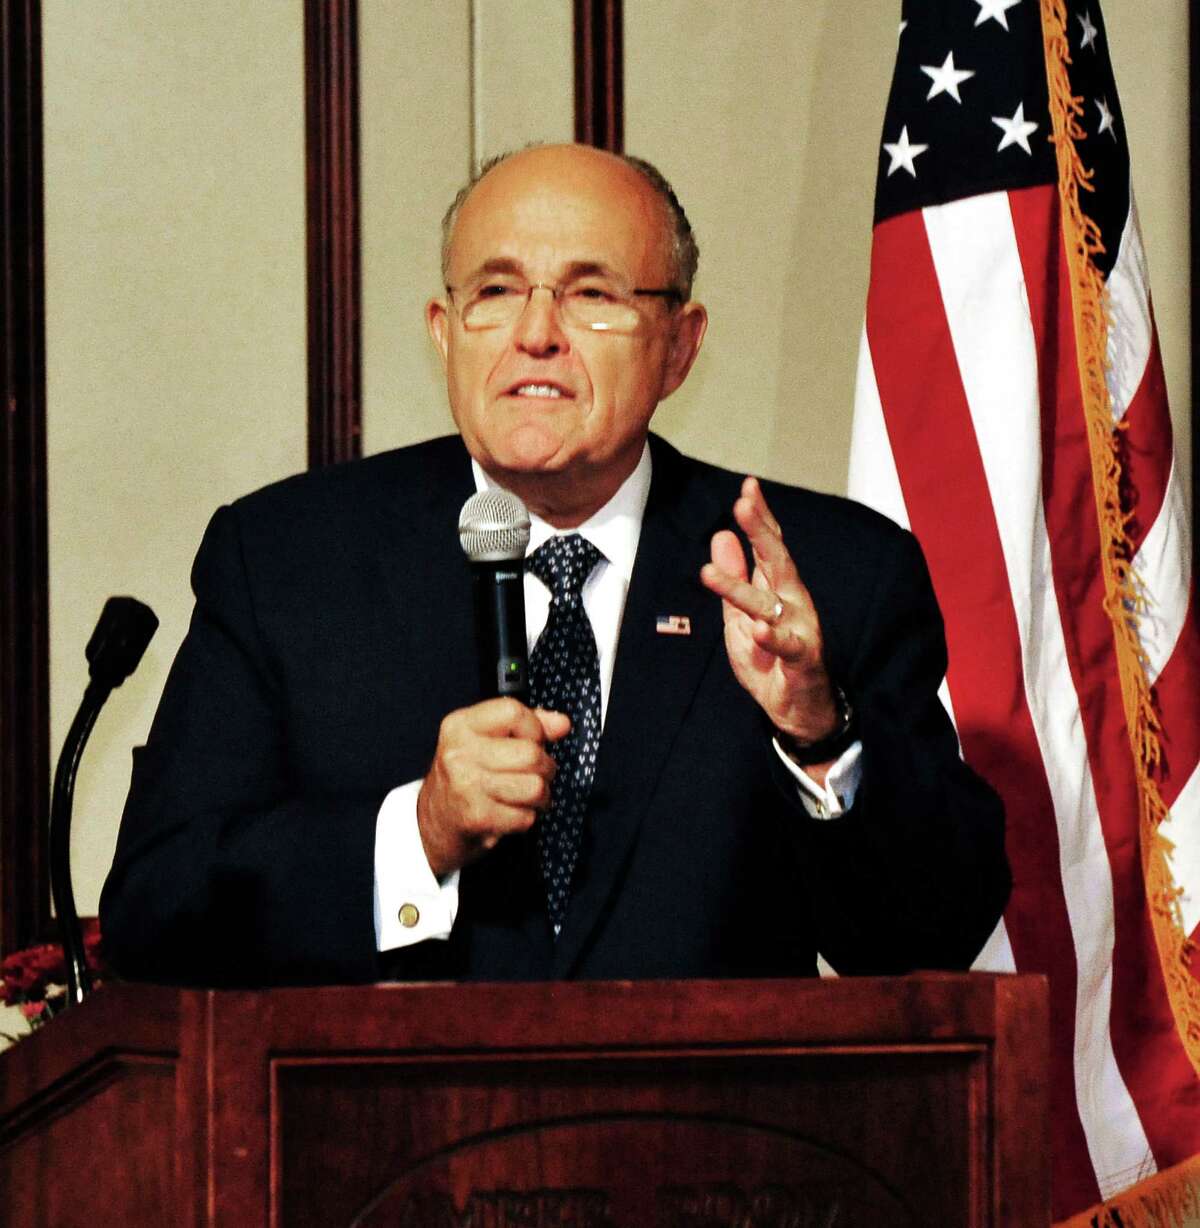 Rudy Giuliani speaks at the Amber Room Colonnade during the Annual Fall Celebrity Breakfast for Catholic Charities of Greater Danbury, in Danbury, Conn. Thursday, Oct. 24, 2013.